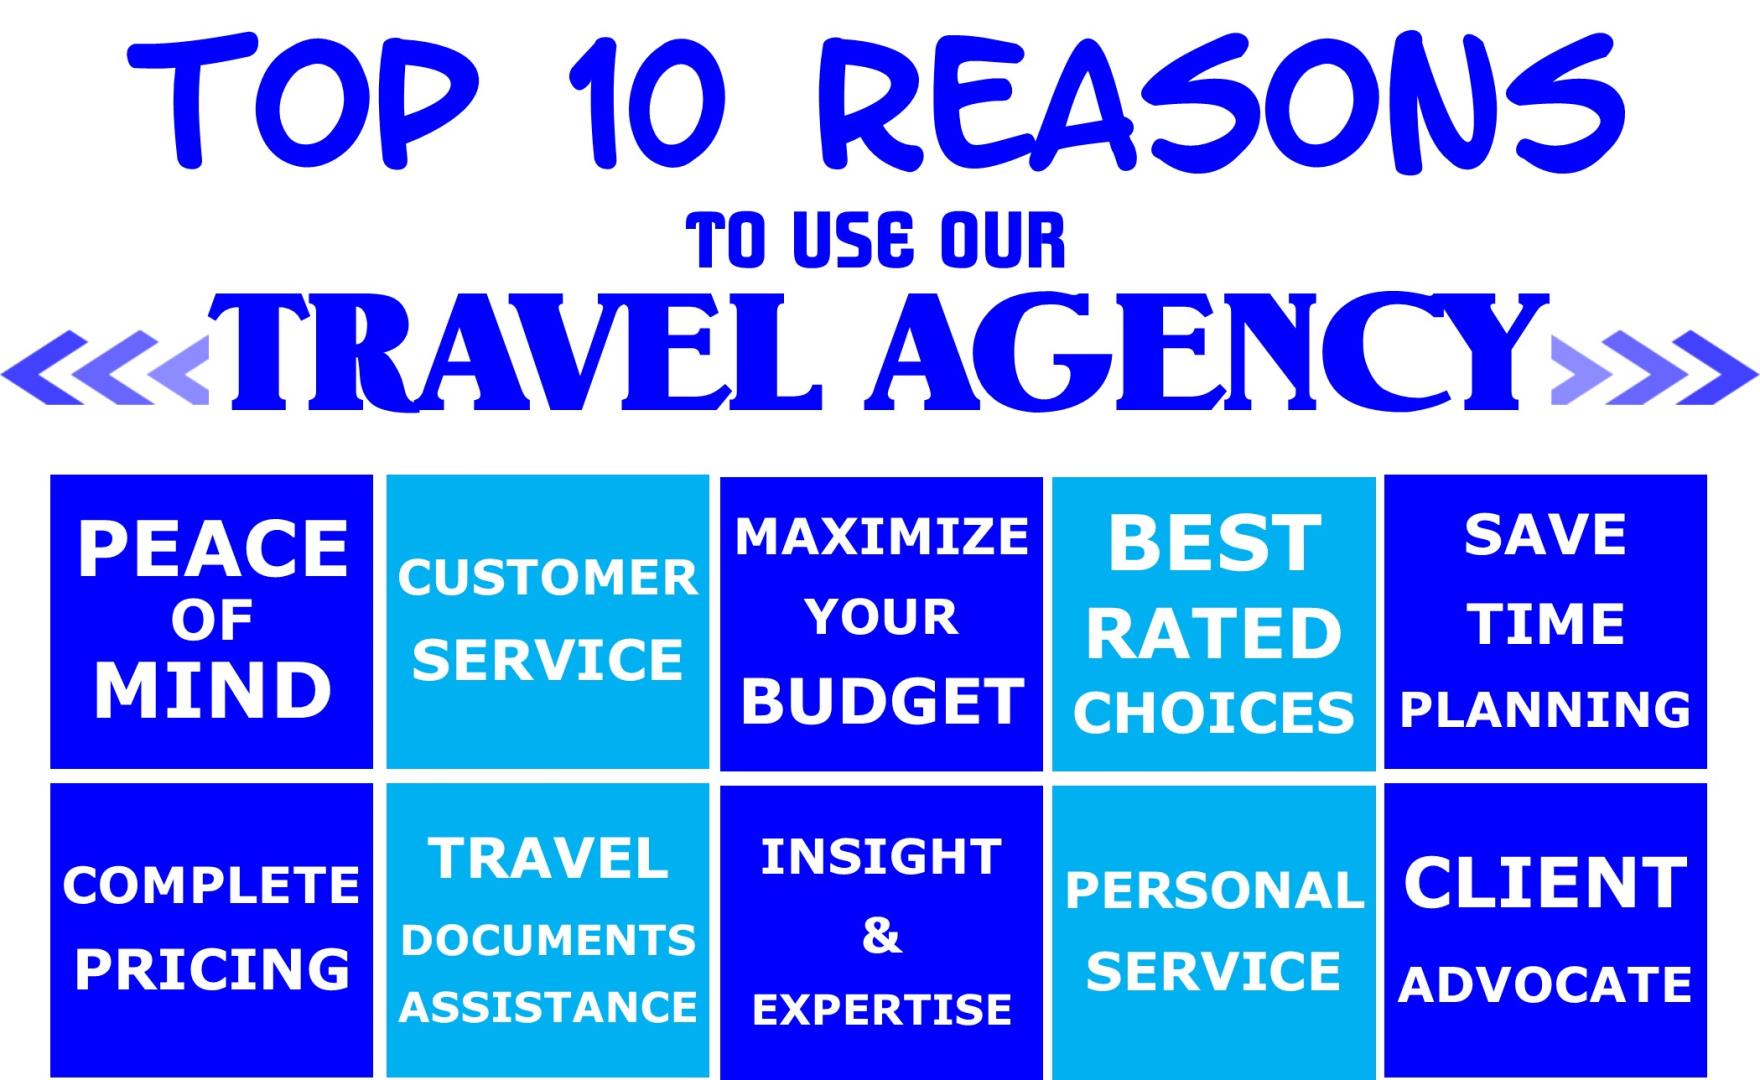 Top Ten Reasons To Use Our Agency.